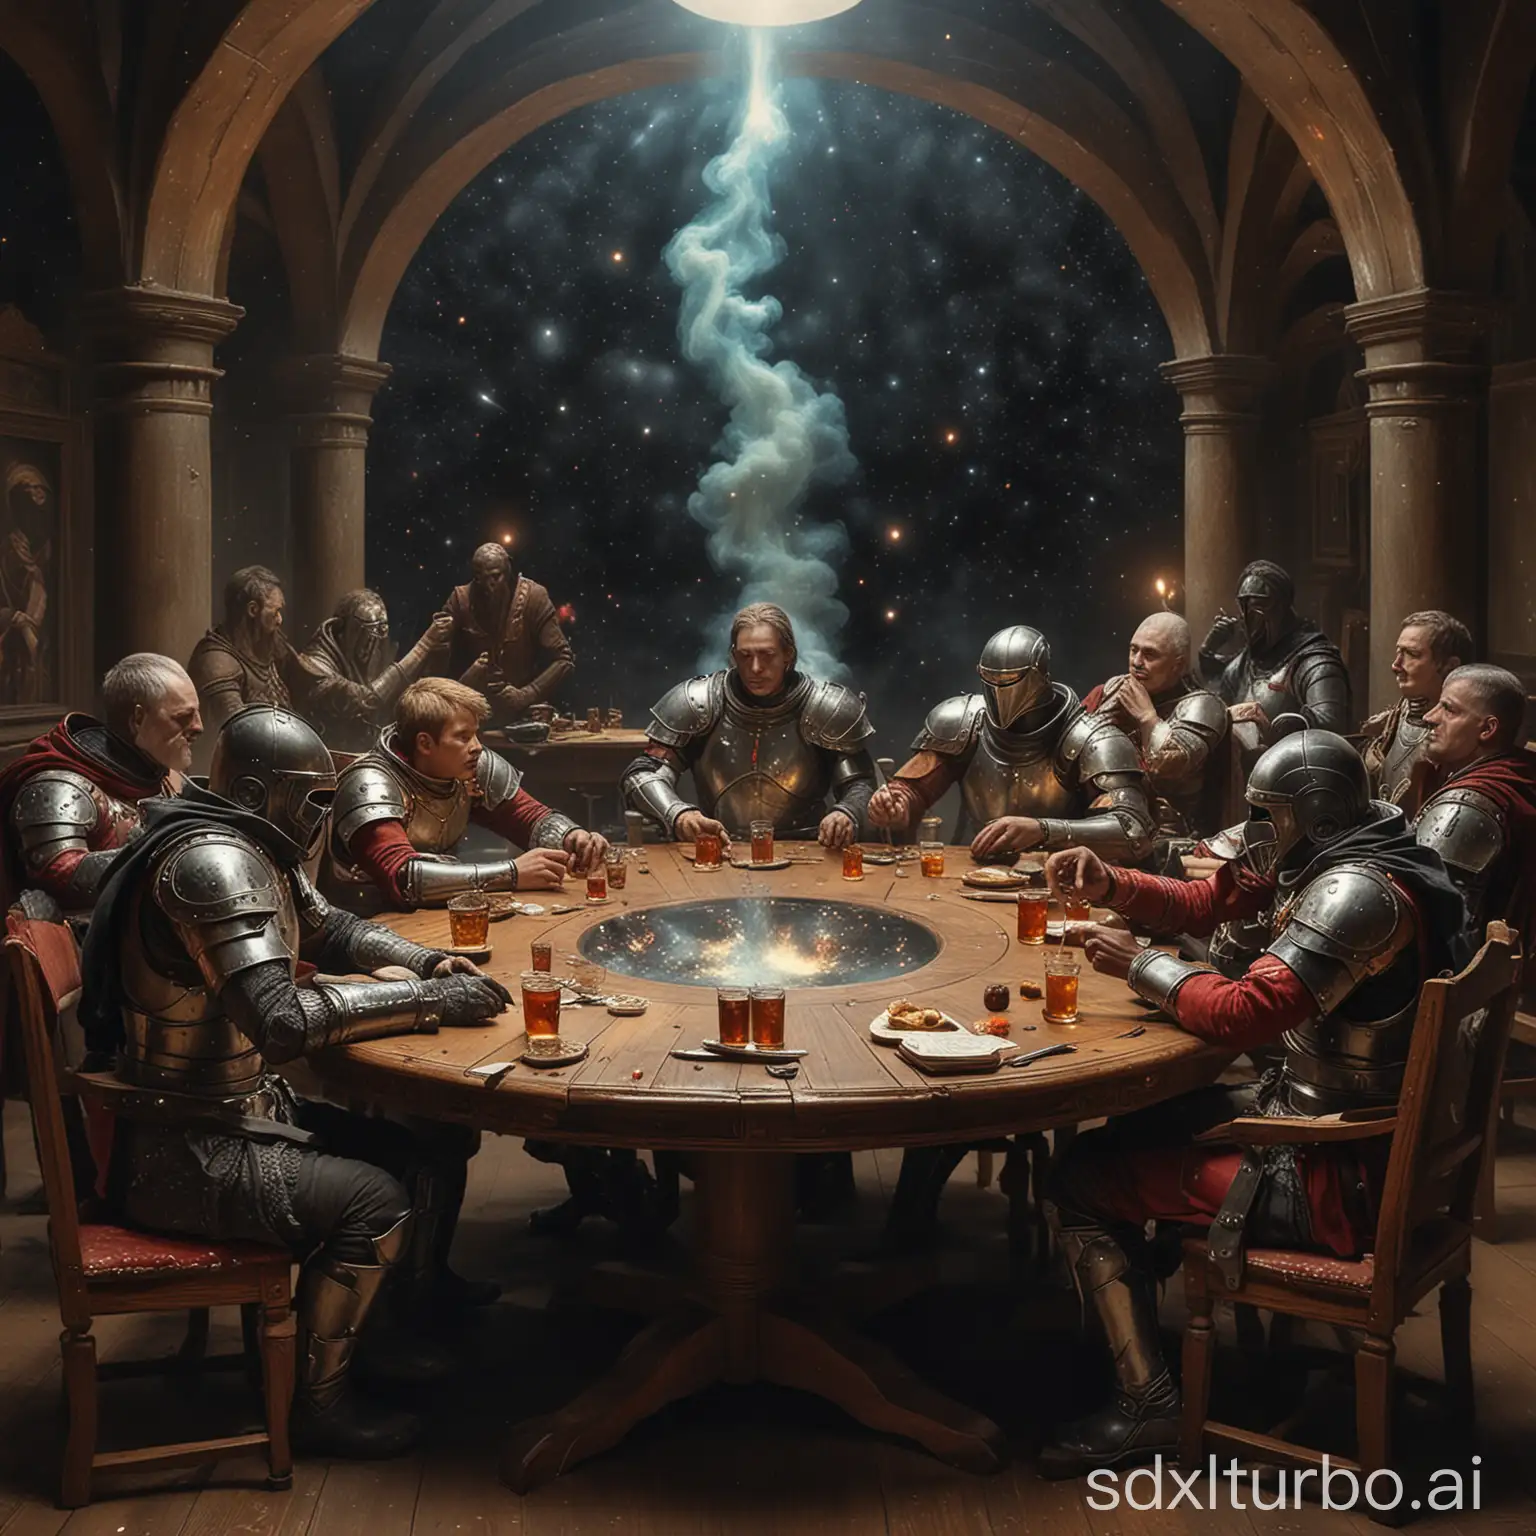 Die Ritter der Tafelrunde im Weltall, at every seat is a Godlike being, next to the round table one can see in the distant galaxies, they are drinkingb and smoking mariuahan